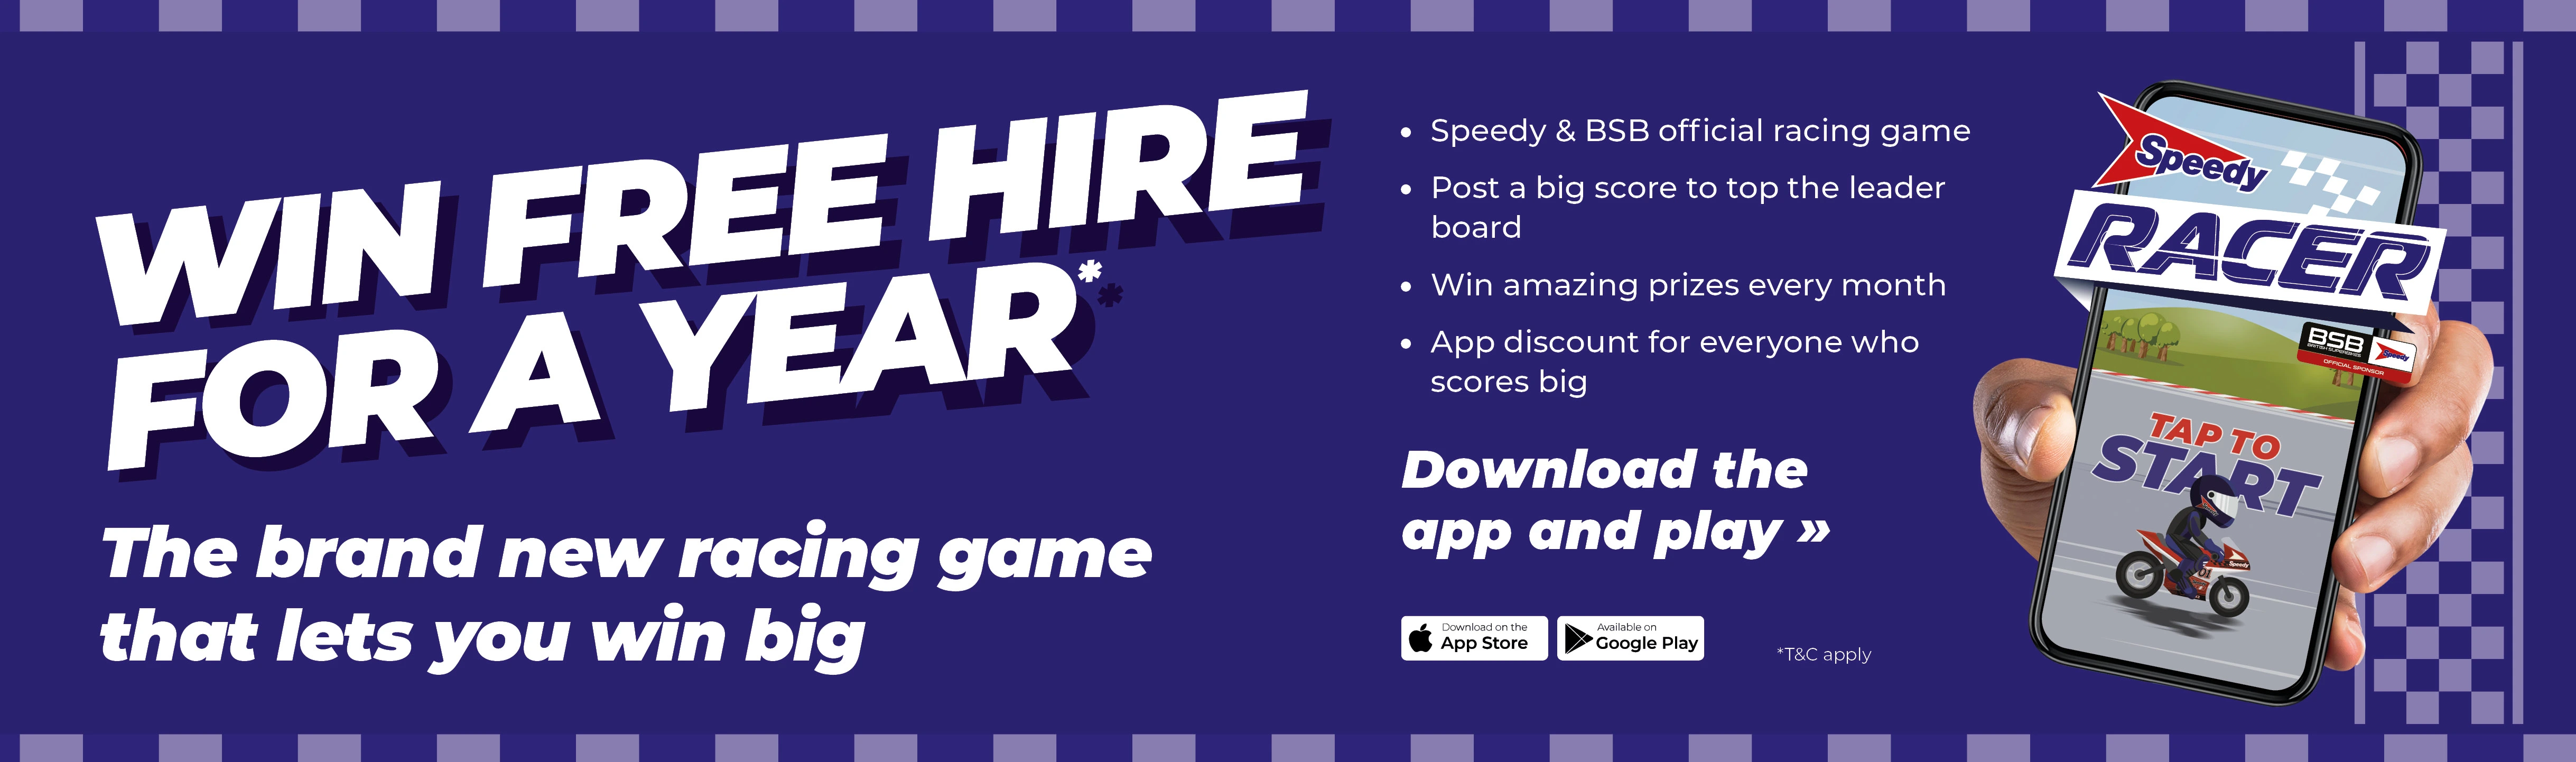 WIN FREE HIRE: DOWNLOAD THE SPEEDY APP AND PLAY NOW!